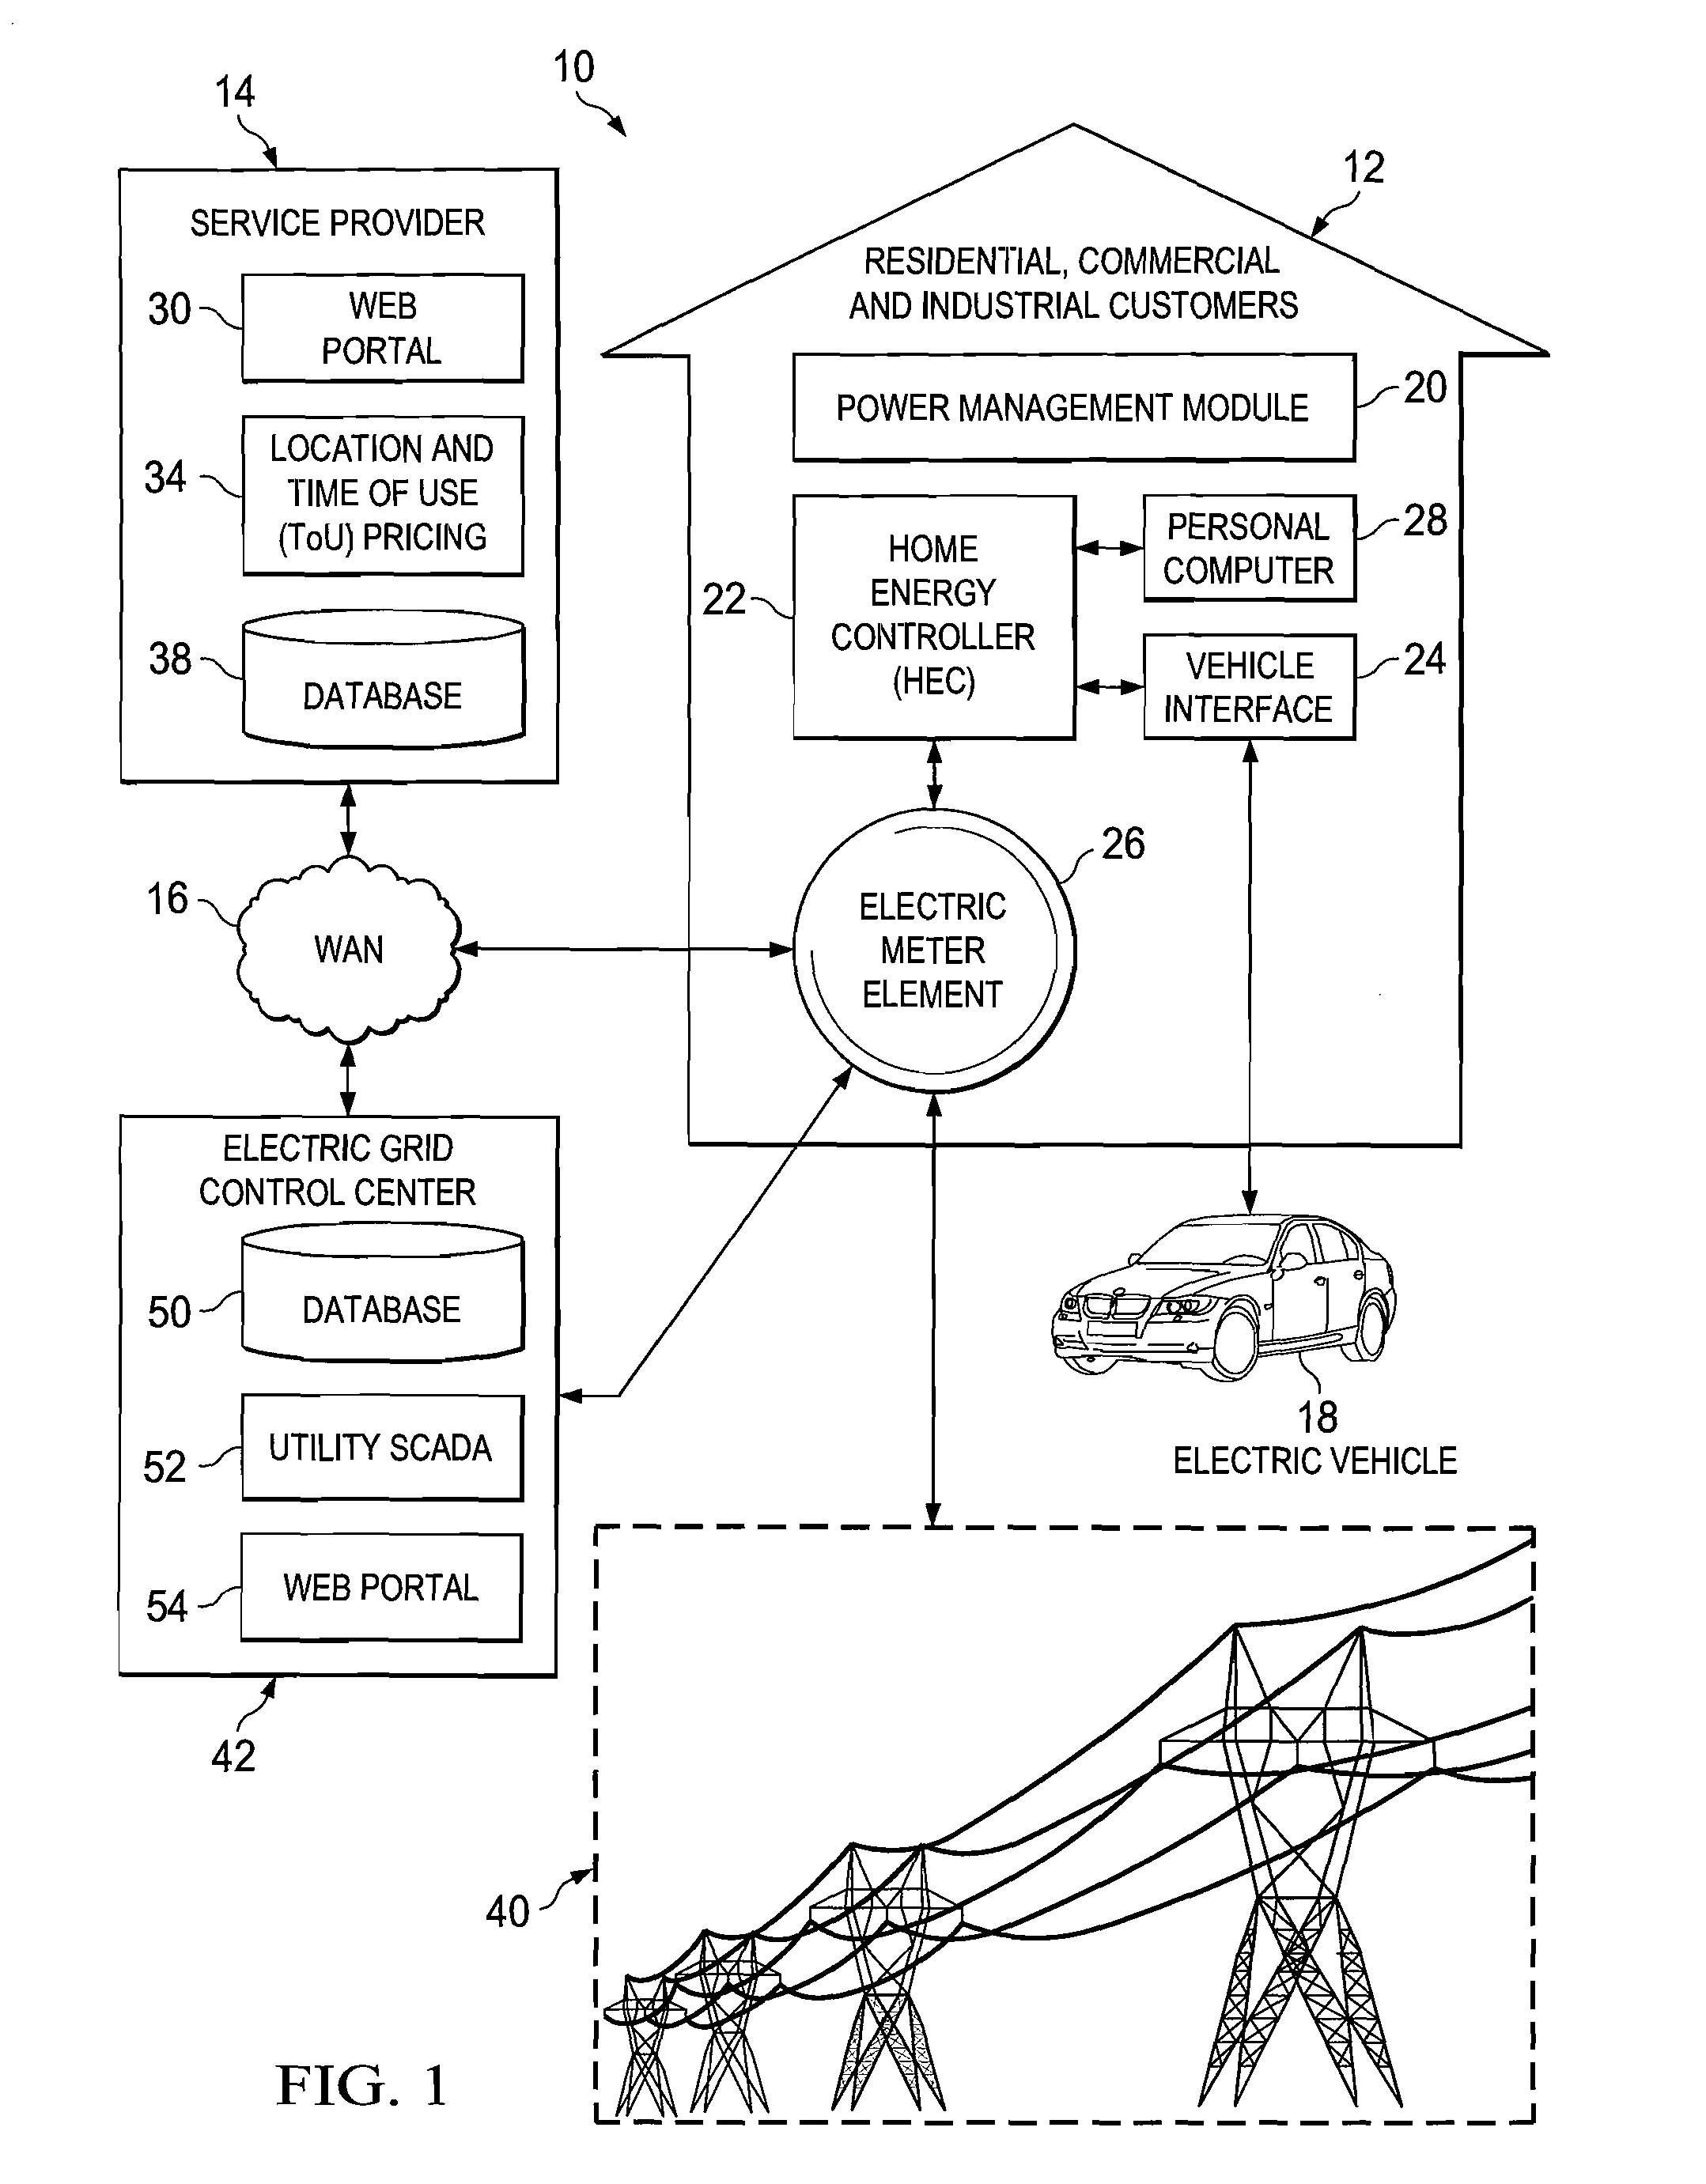 System and method for managing electric vehicle travel